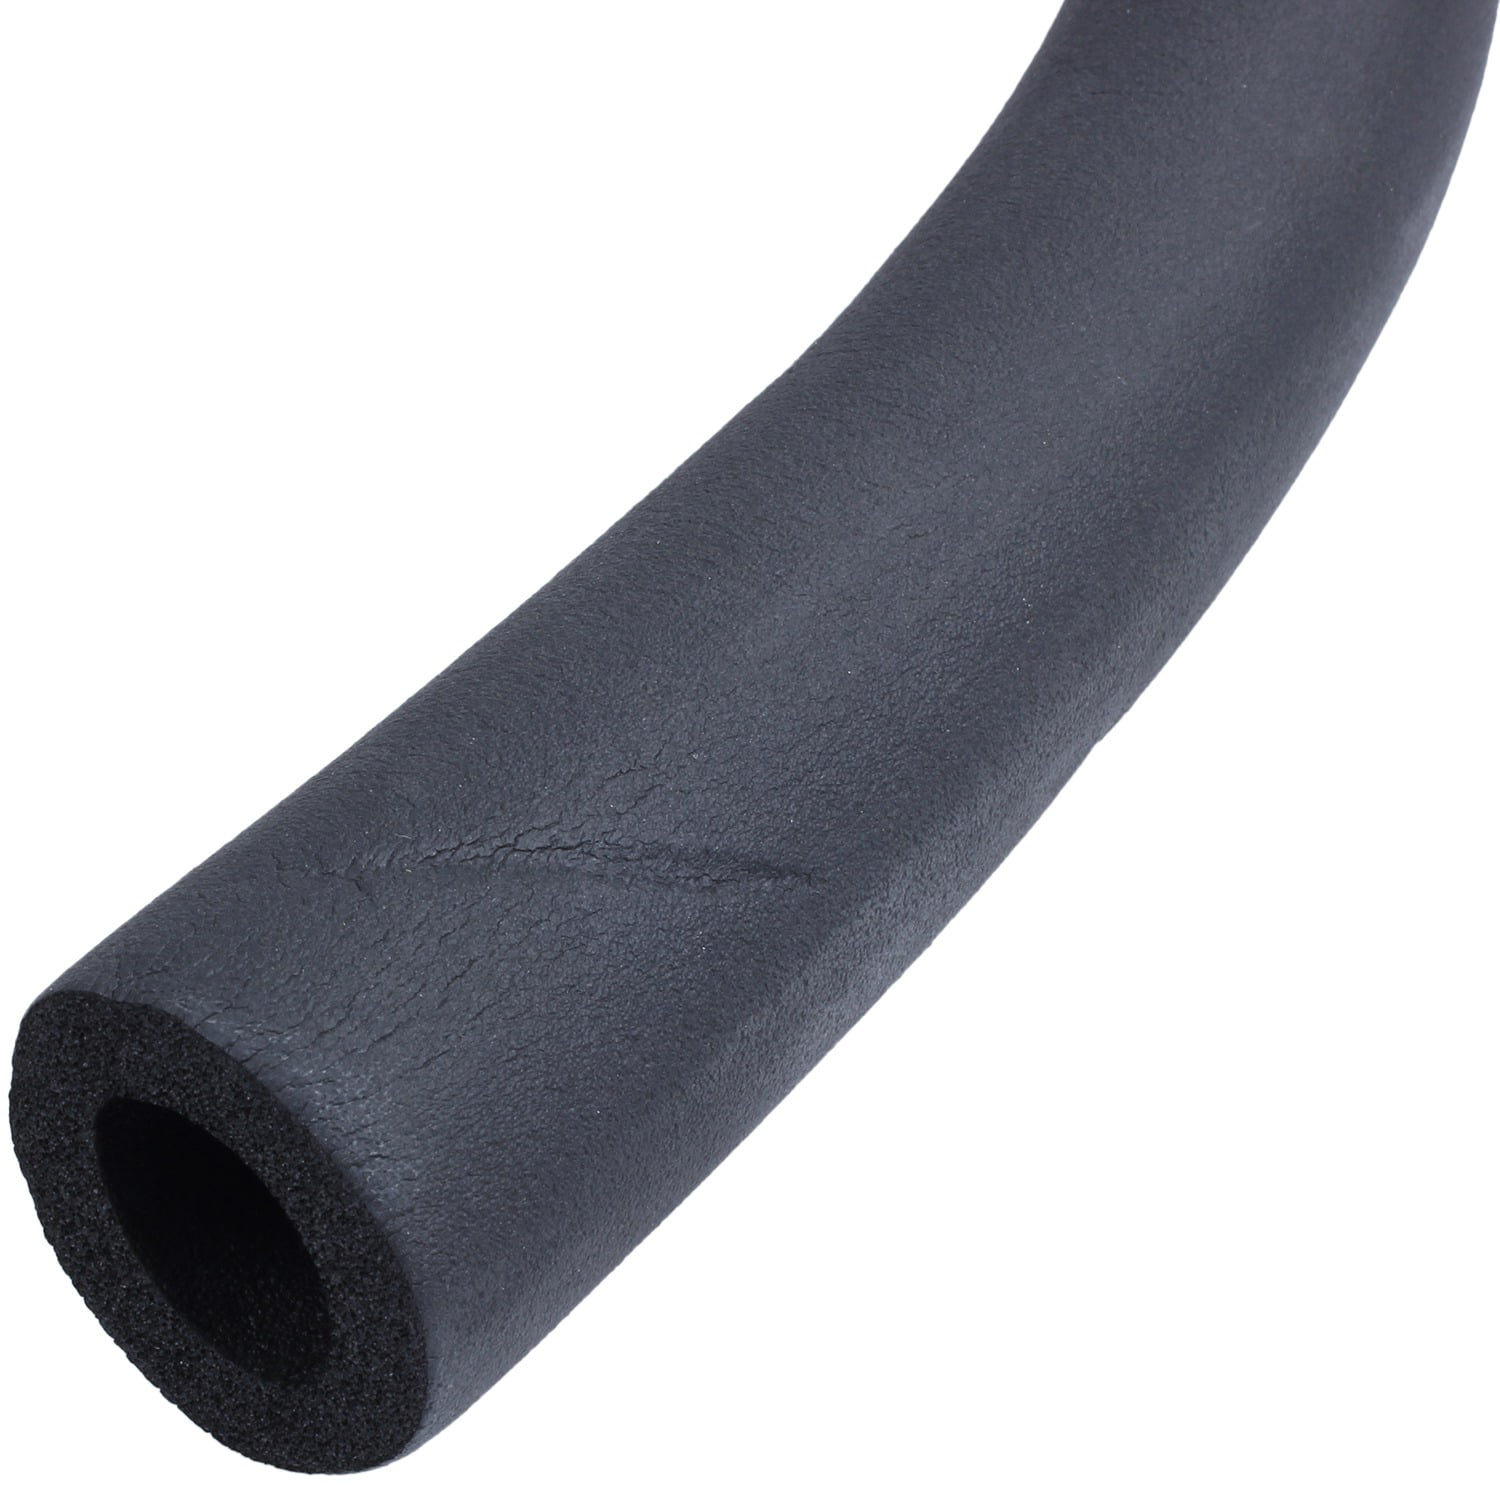 6Ft Long Hose 3/4" x 3/8" Air Conditioner Heat Insulation Pipe Black N3 